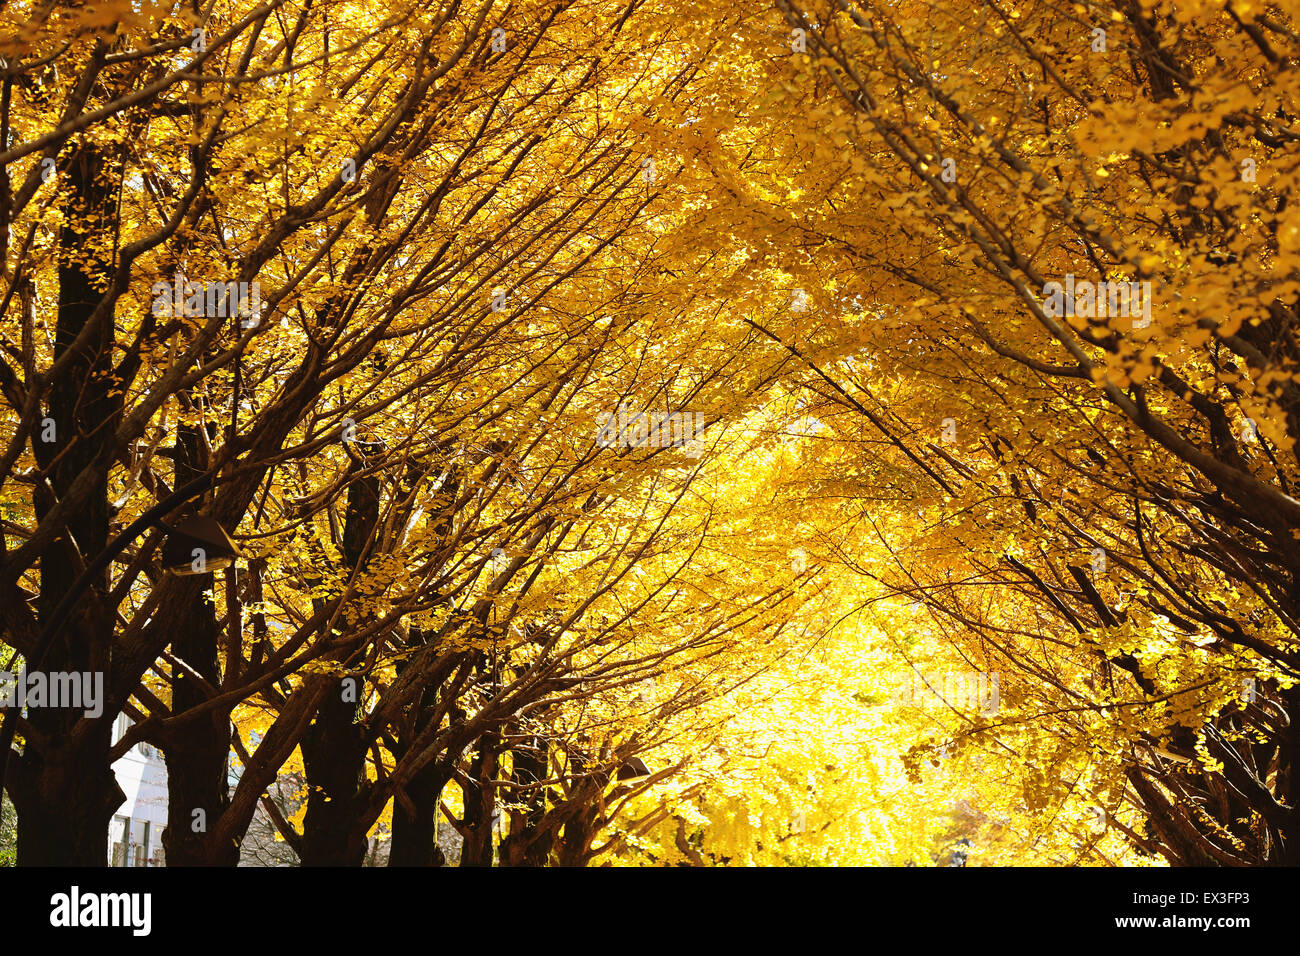 Autumn leaves in a city park Stock Photo